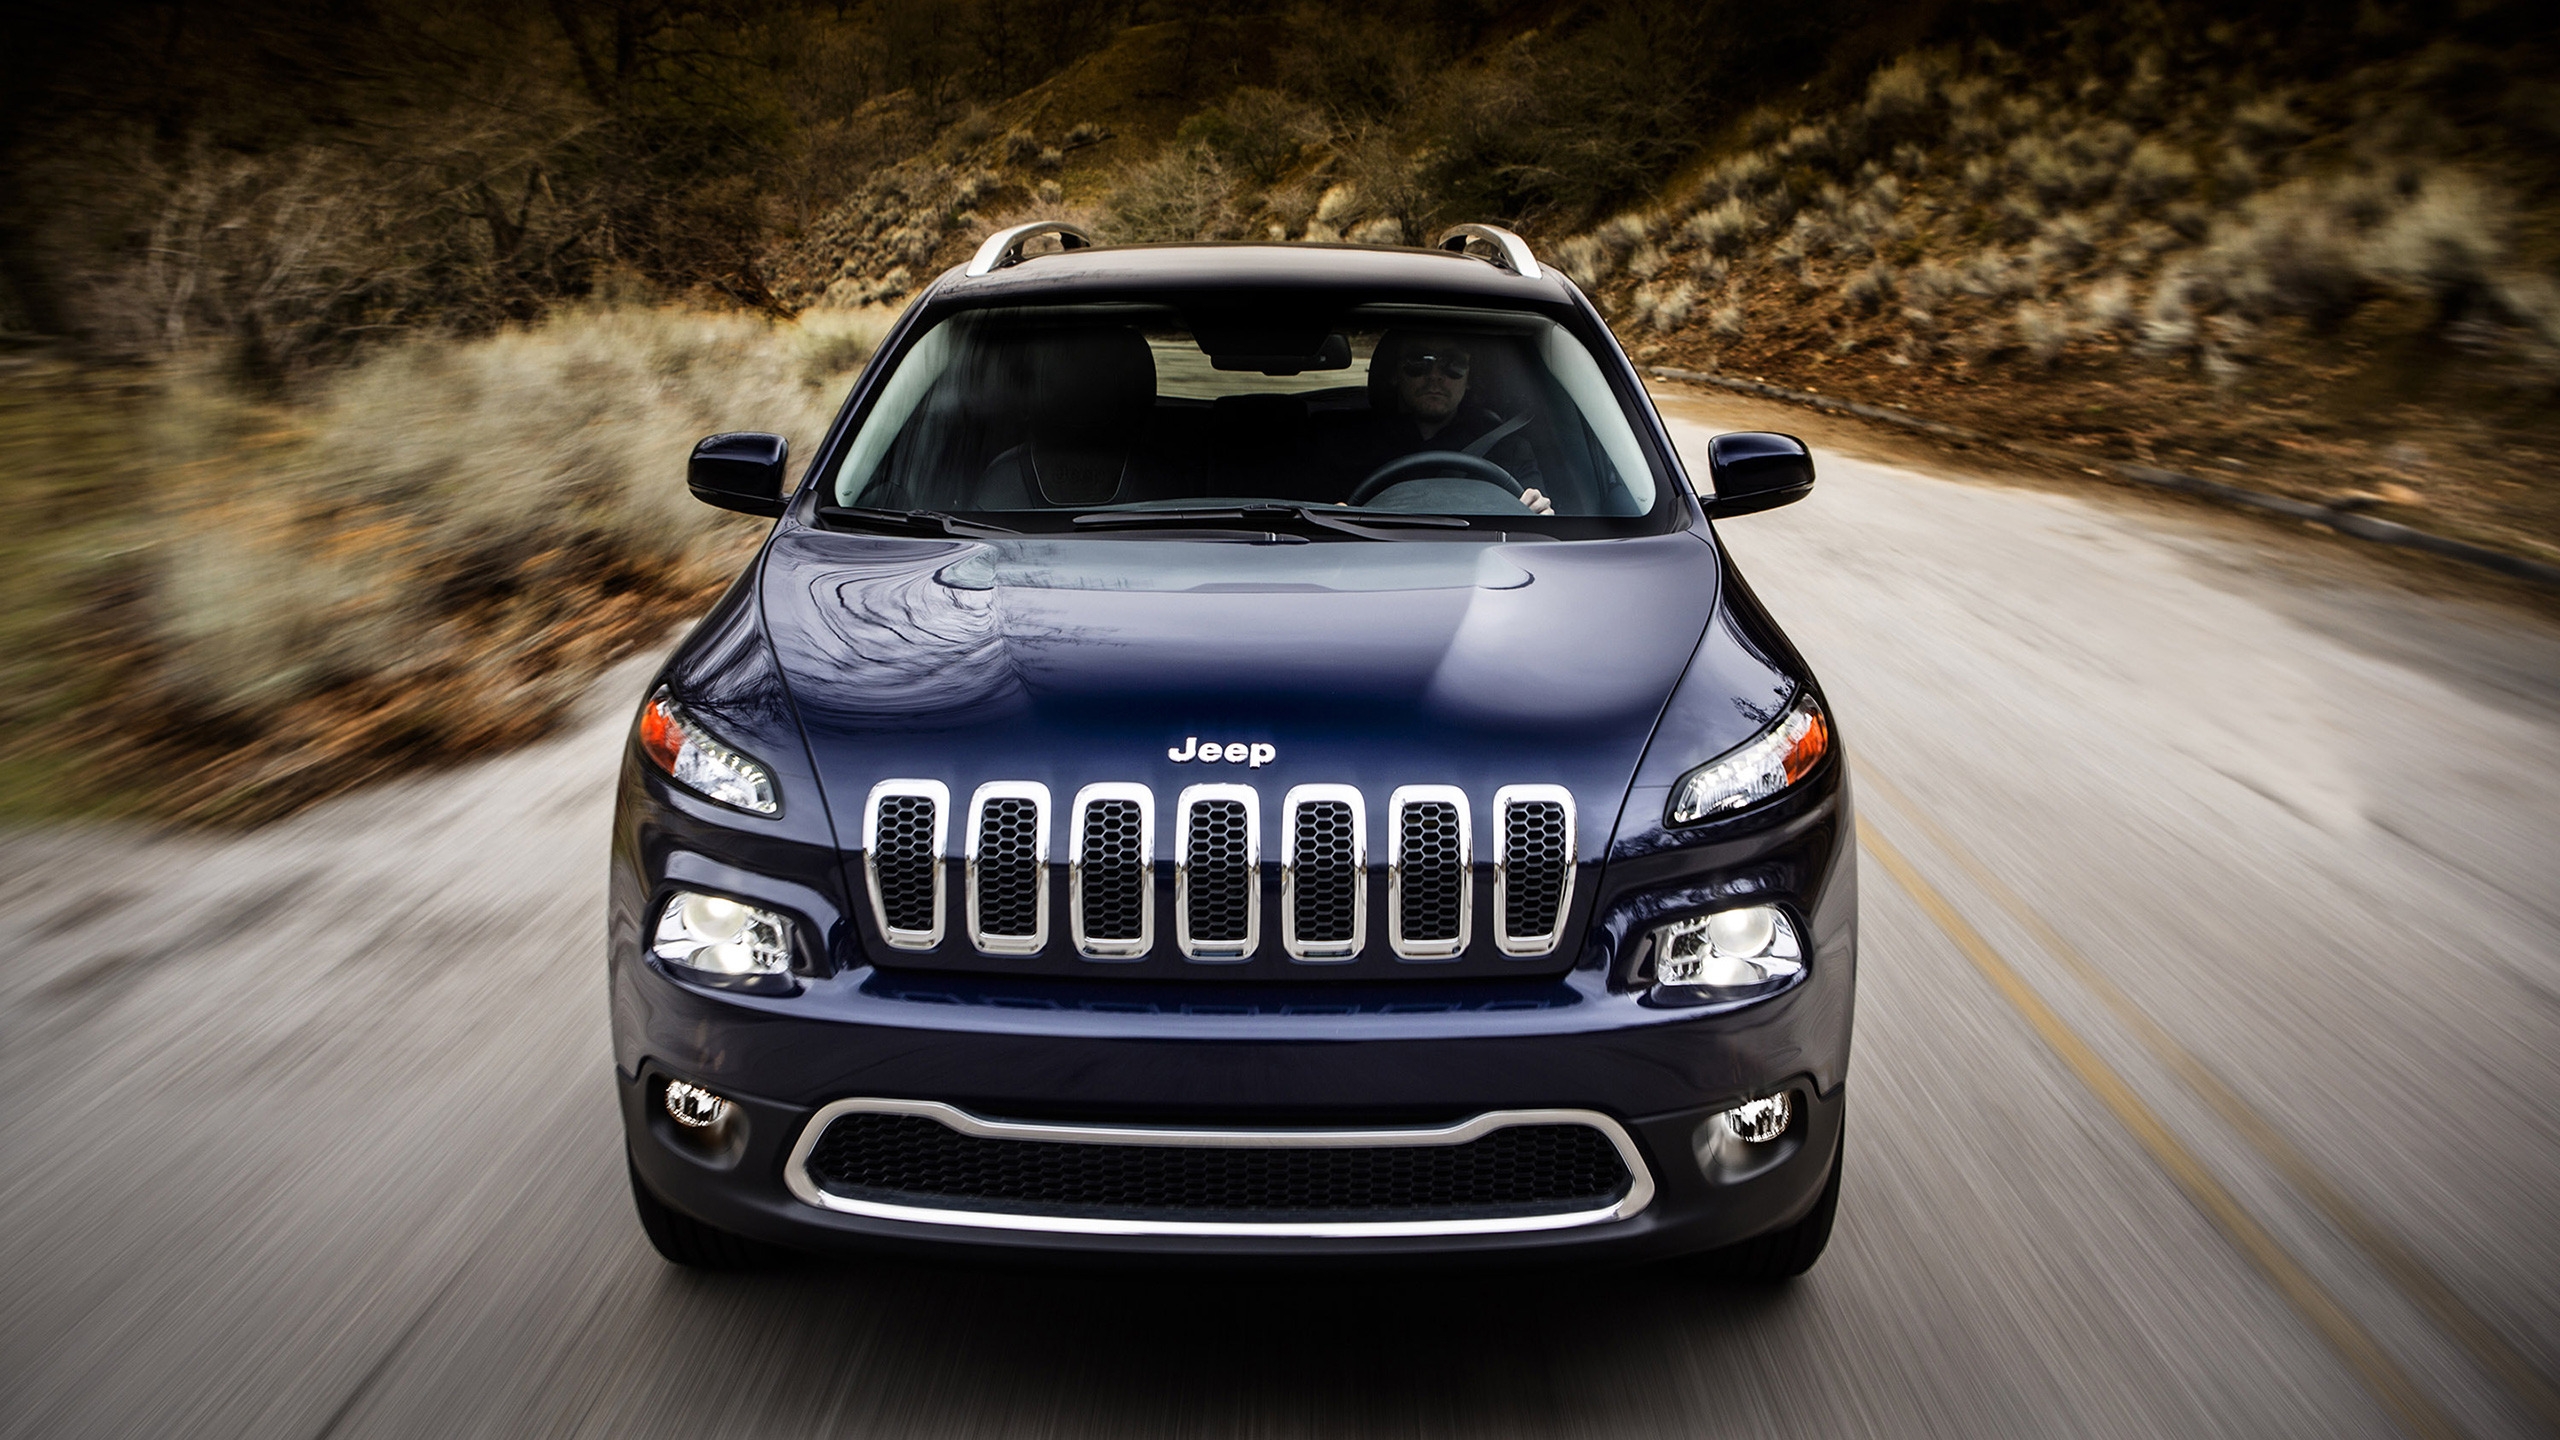 2014 Jeep Cherokee for 2560x1440 HDTV resolution